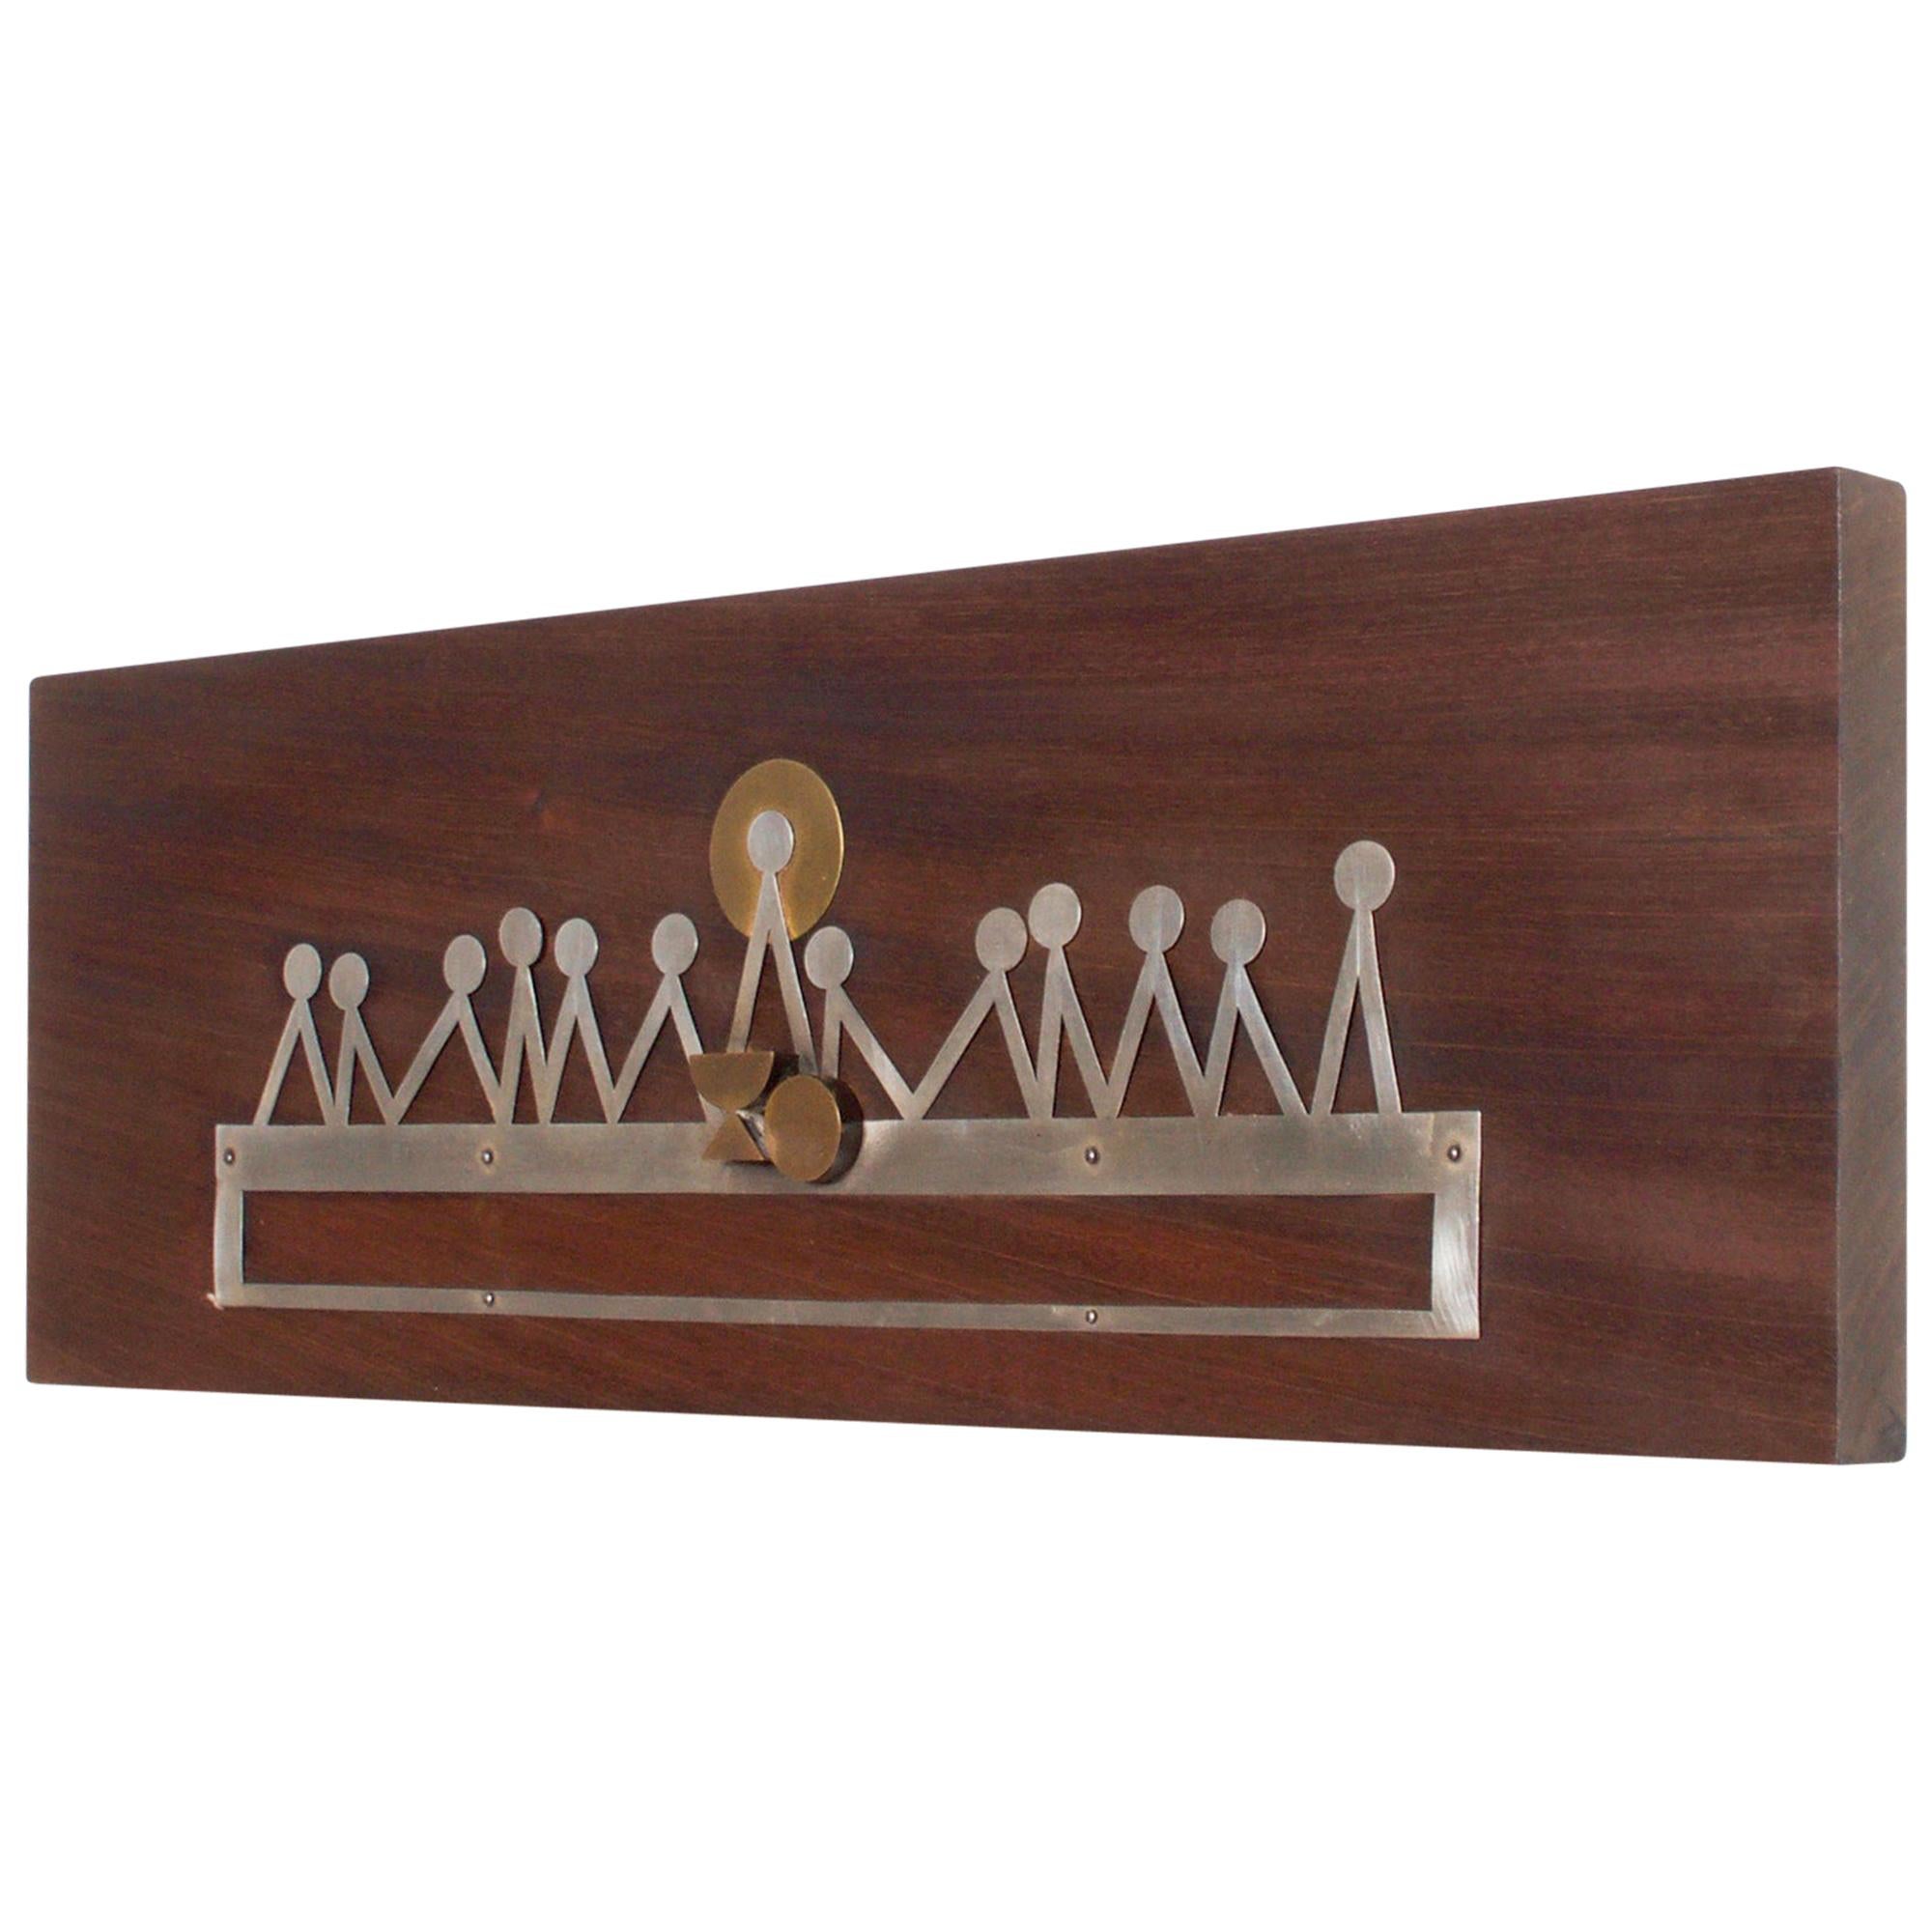 Last Supper Abstract Wall Sculpture Modernist Plaque by Emaus Benedictine Monks